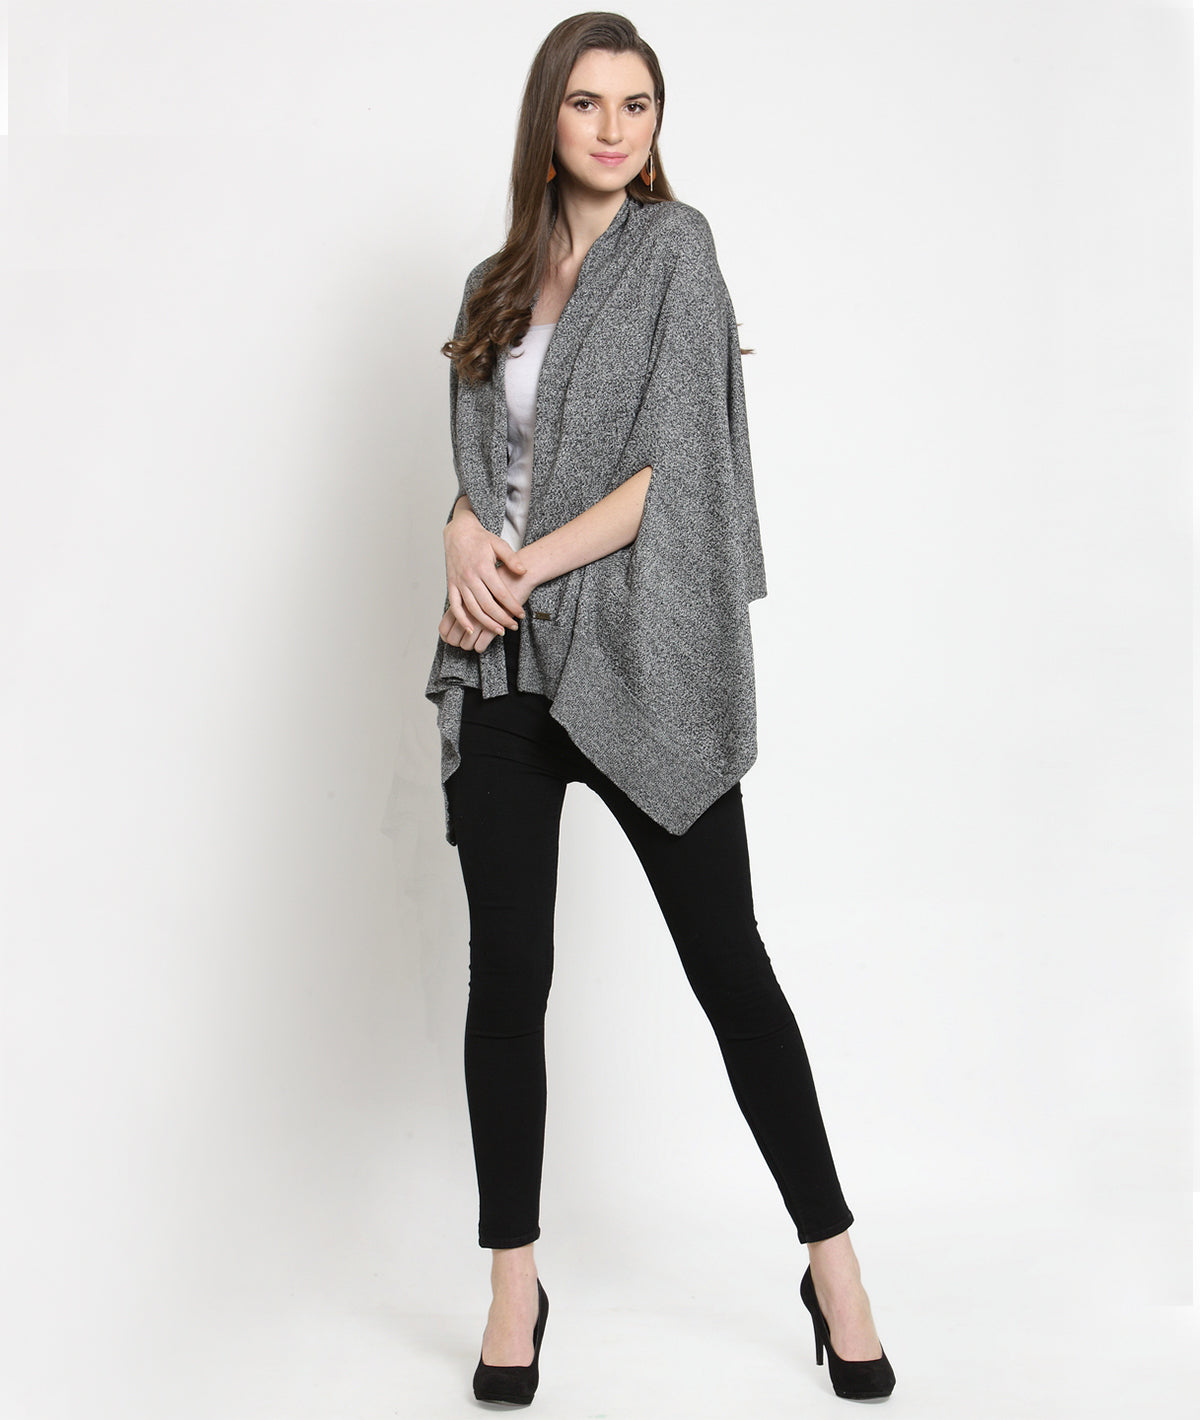 Palma Knitted Cotton Fashion Poncho / Top / Cape in Grey & Black Color for Everyday Chic Look (One Size Fits All)